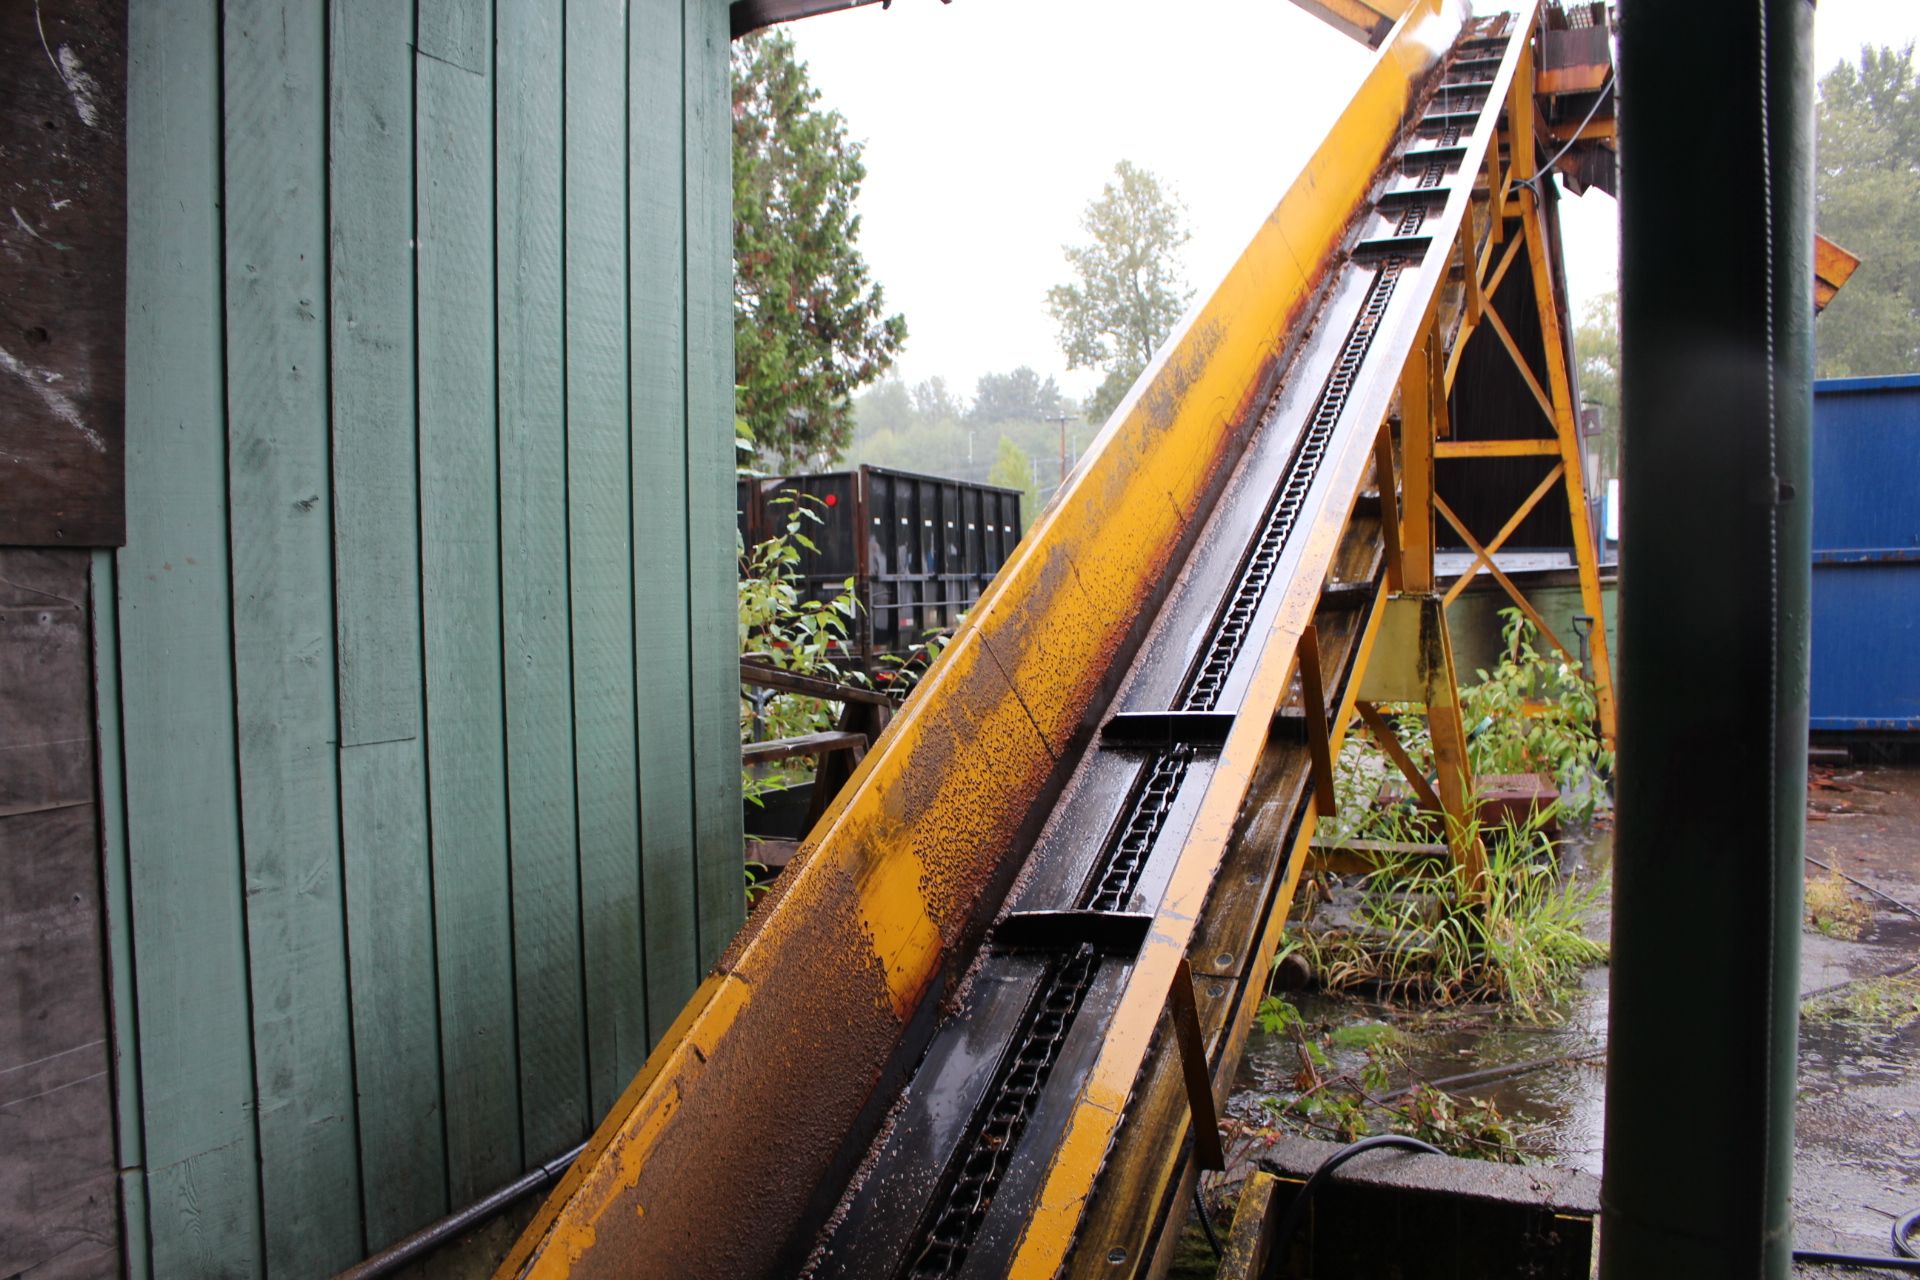 16" X 40' FLYTED INCLINE WASTE CHAIN CONVEYOR